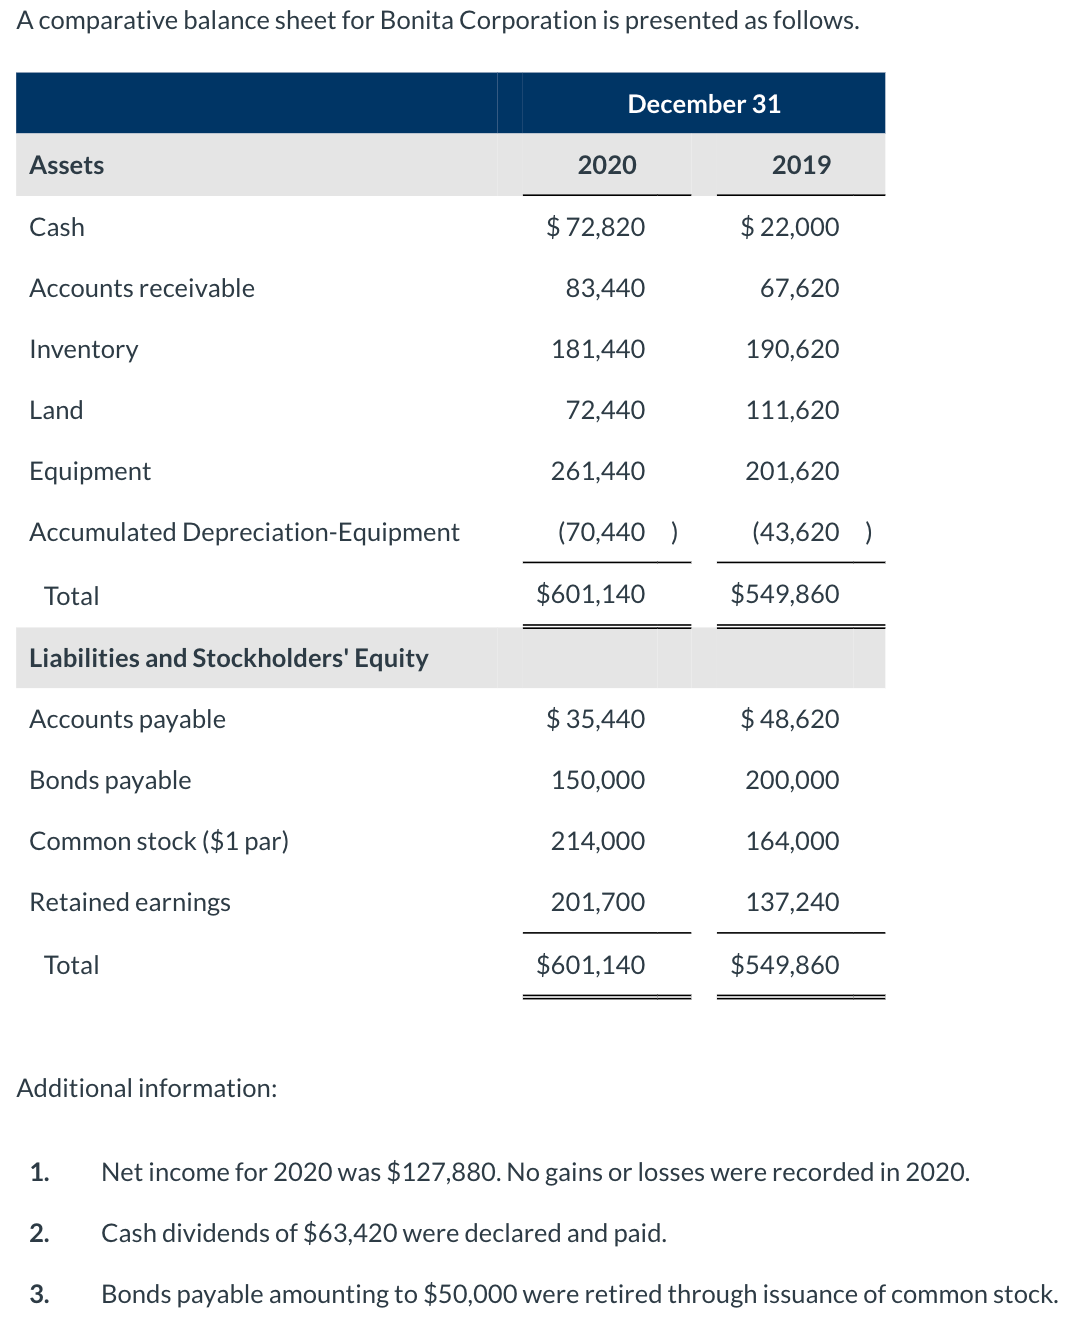 A comparative balance sheet for Bonita Corporation is presented as follows.
Assets
Cash
Accounts receivable
Inventory
Land
Equipment
Accumulated Depreciation-Equipment
Total
Liabilities and Stockholders' Equity
Accounts payable
Bonds payable
Common stock ($1 par)
Retained earnings
Total
Additional information:
1.
2.
3.
December 31
2020
$72,820
83,440
181,440
72,440
261,440
(70,440 )
$601,140
$ 35,440
150,000
214,000
201,700
$601,140
2019
$ 22,000
67,620
190,620
111,620
201,620
(43,620
$549,860
$ 48,620
200,000
164,000
137,240
$549,860
Net income for 2020 was $127,880. No gains or losses were recorded in 2020.
Cash dividends of $63,420 were declared and paid.
Bonds payable amounting to $50,000 were retired through issuance of common stock.